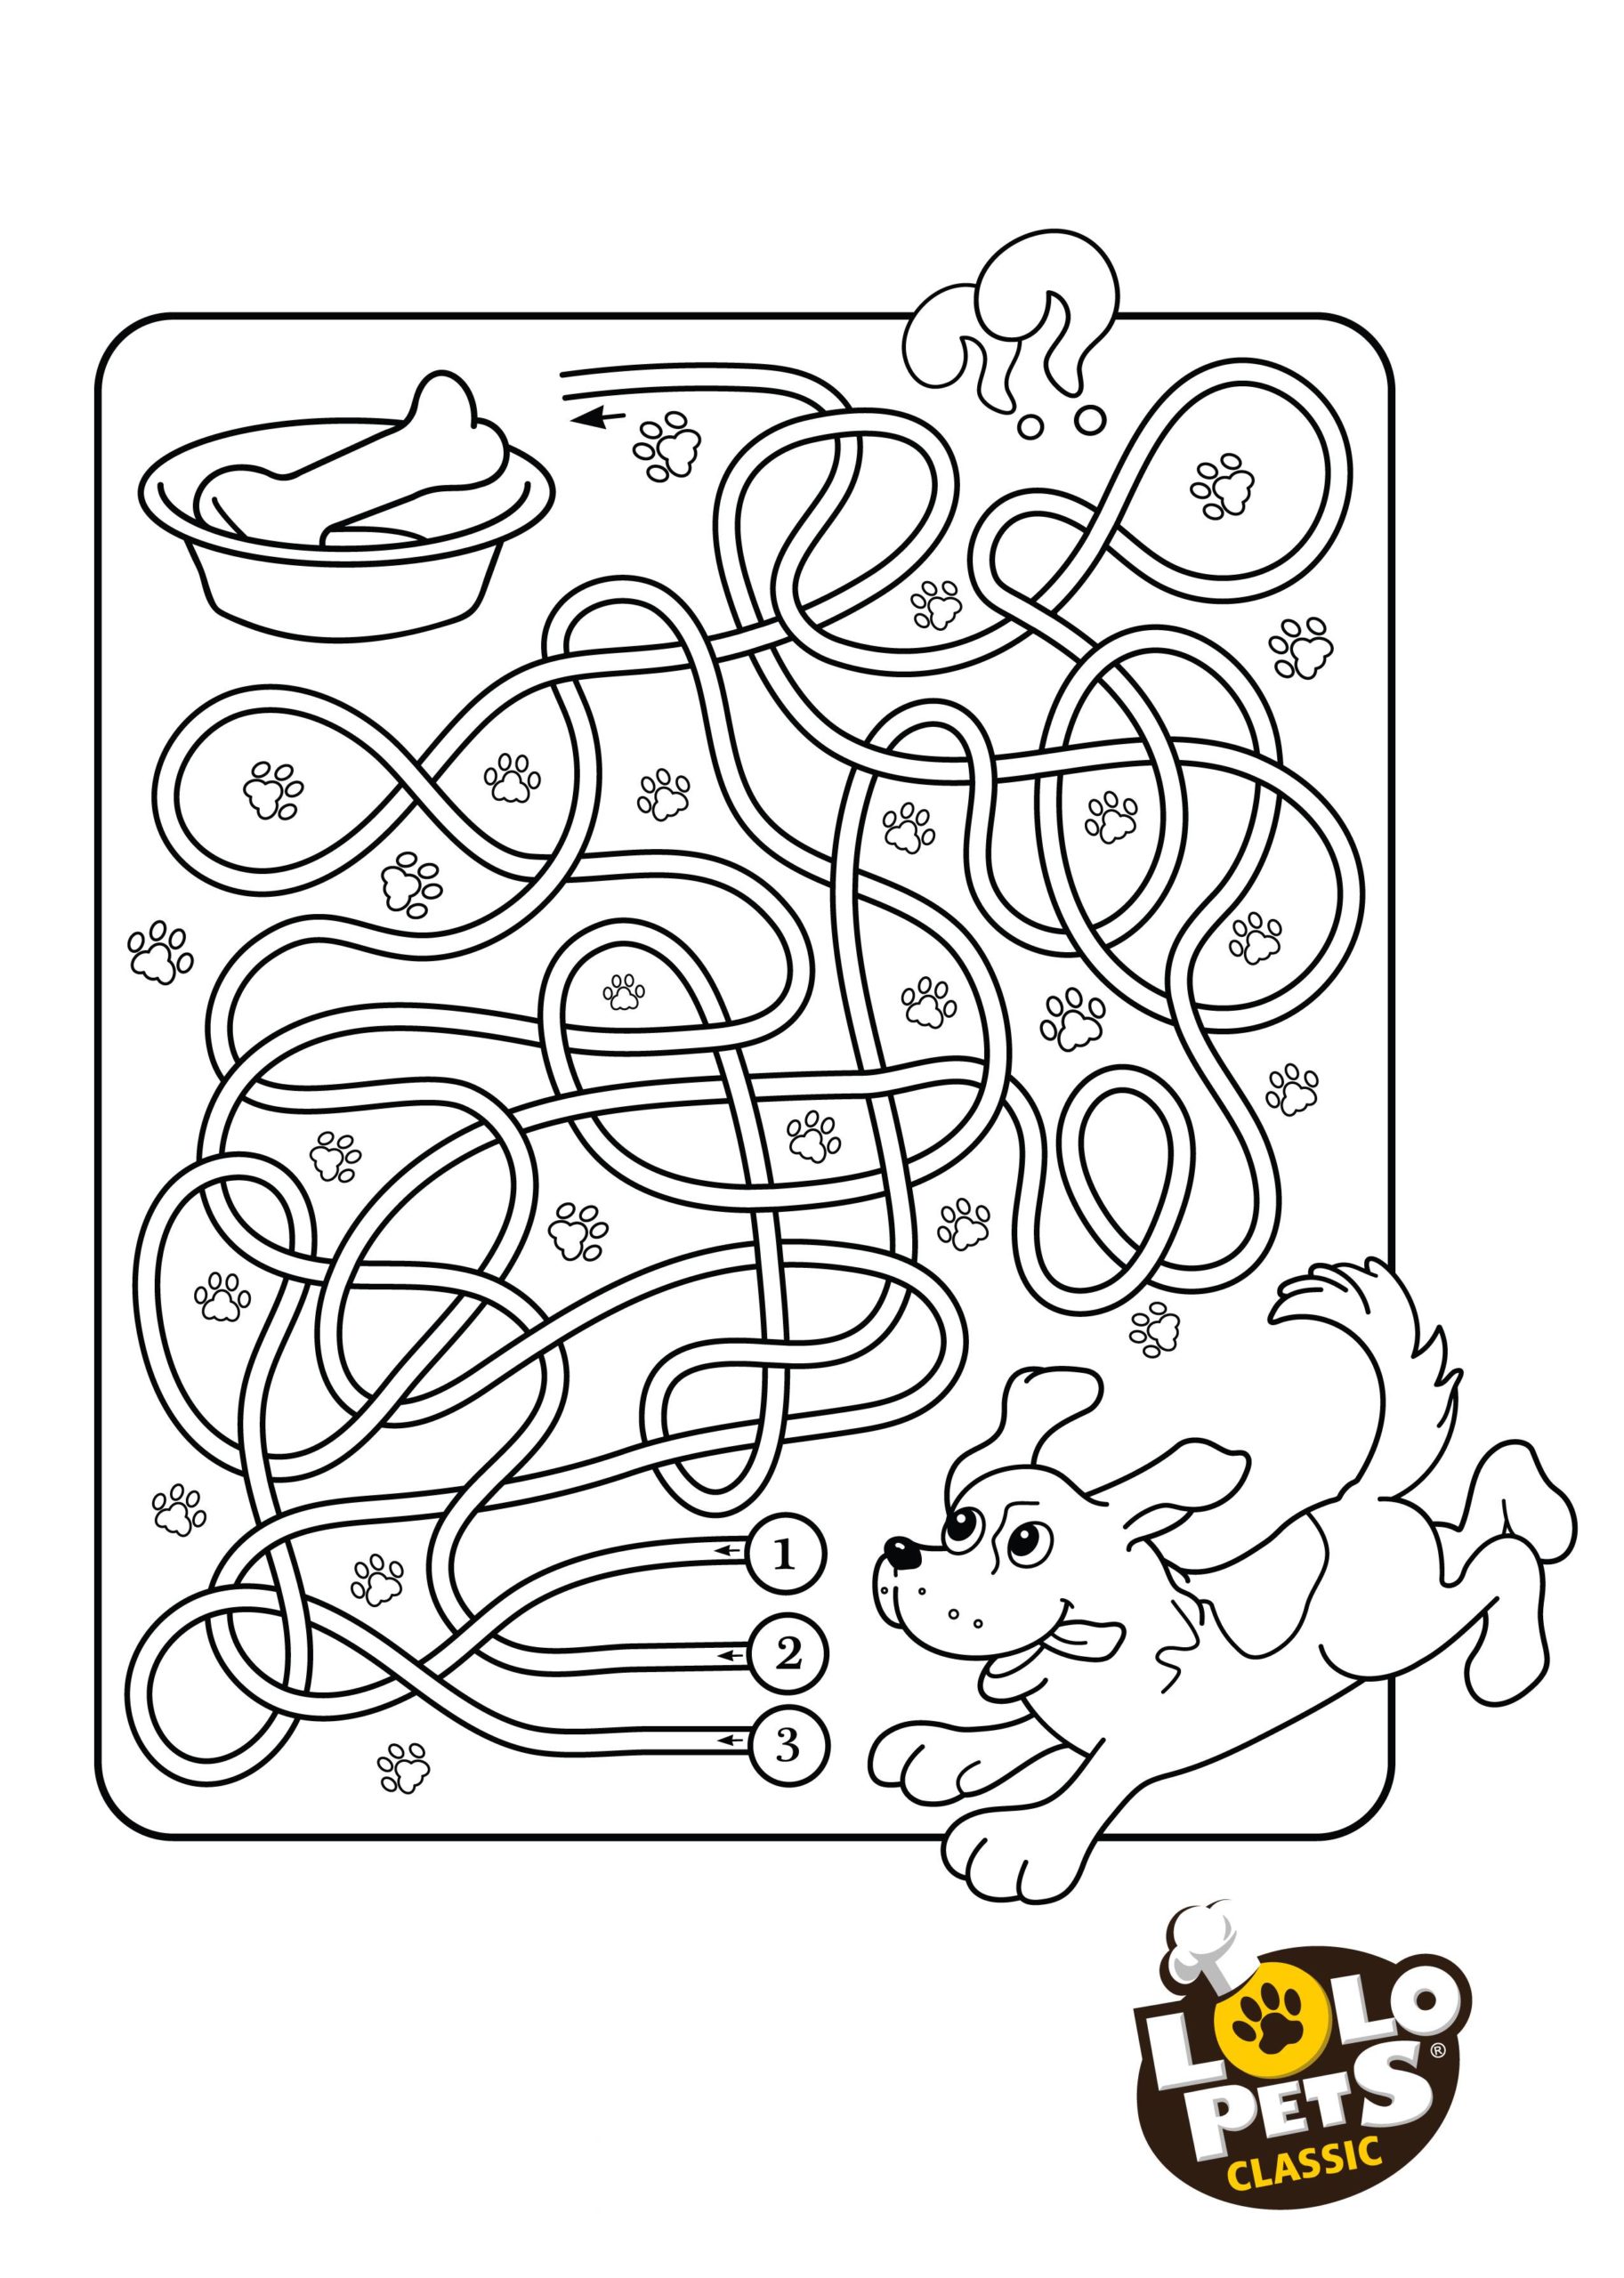 educational-coloring-pages-for-children-s-day-lolo-pets-classic